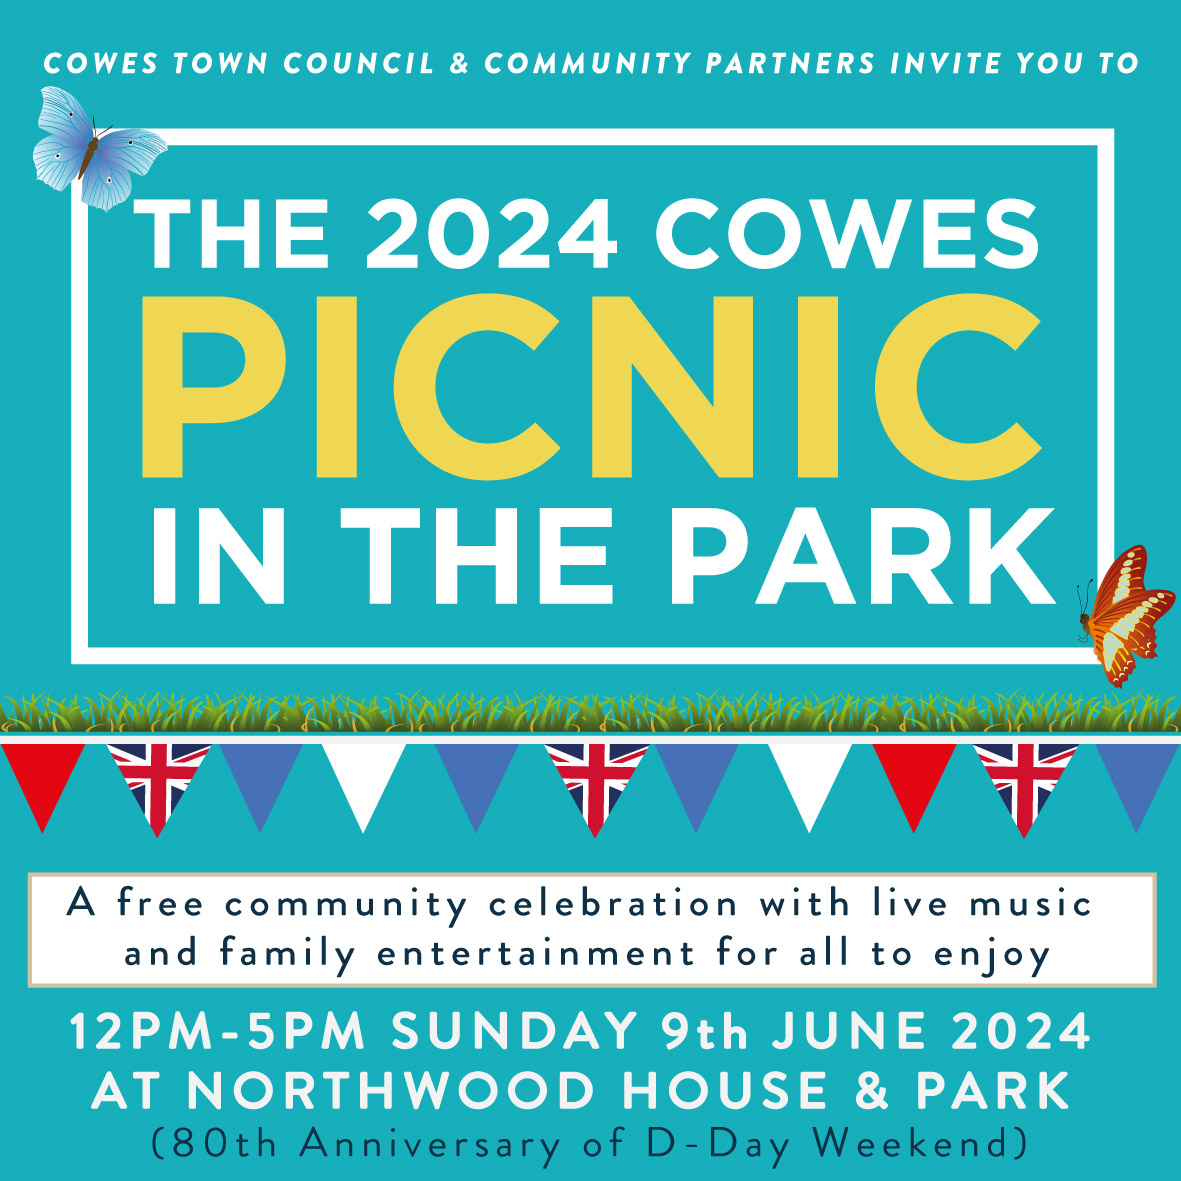 The 2024 Cowes Picnic in the Park